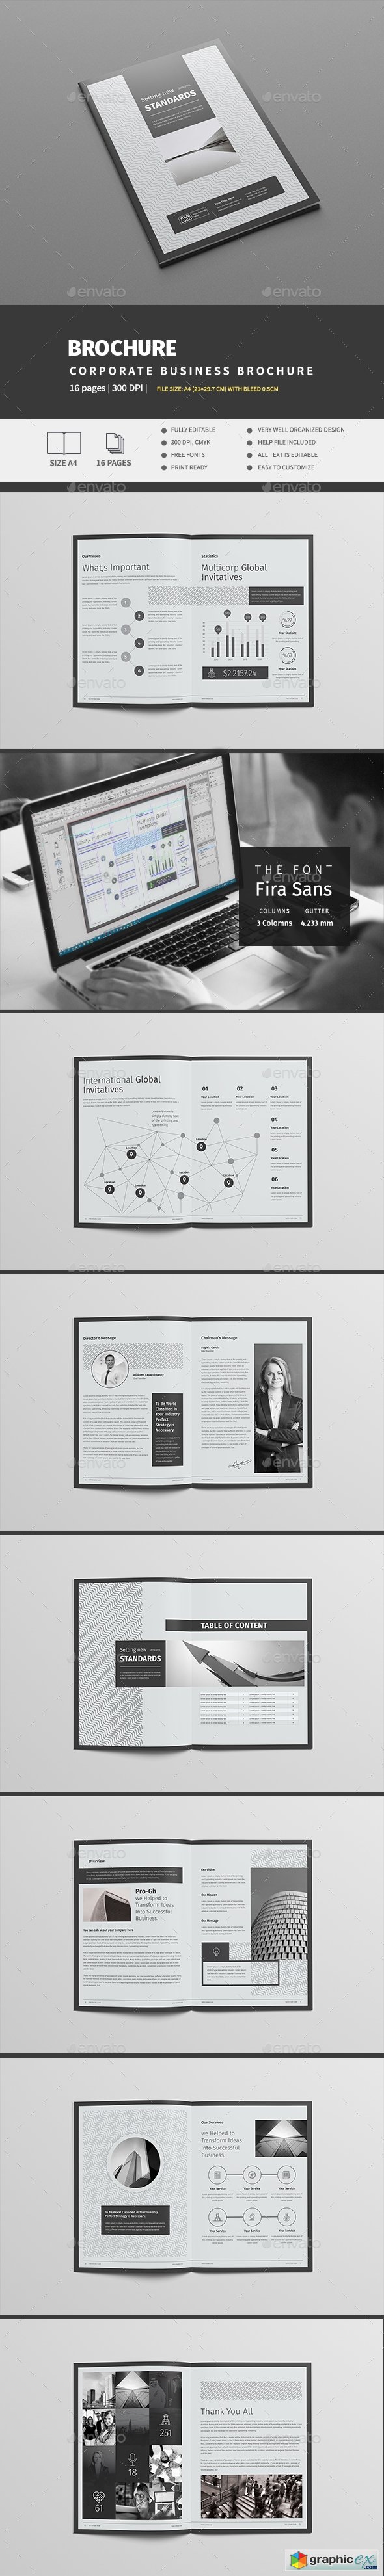 Multipurpose Brochure Template 16 Pages